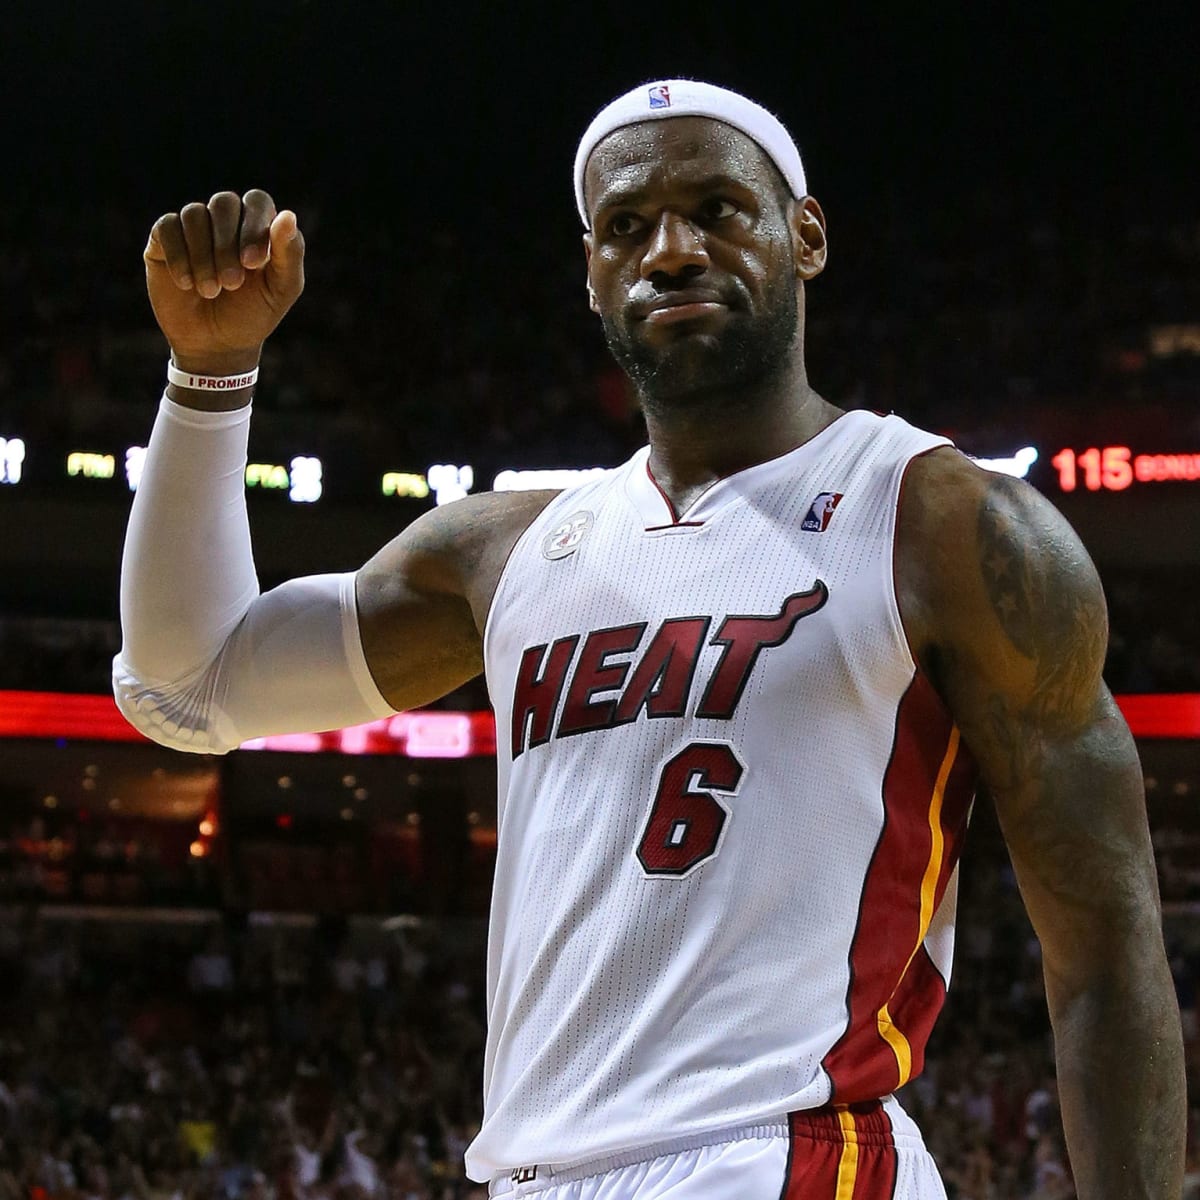 Mario Chalmers Says Nobody Is Afraid of LeBron James